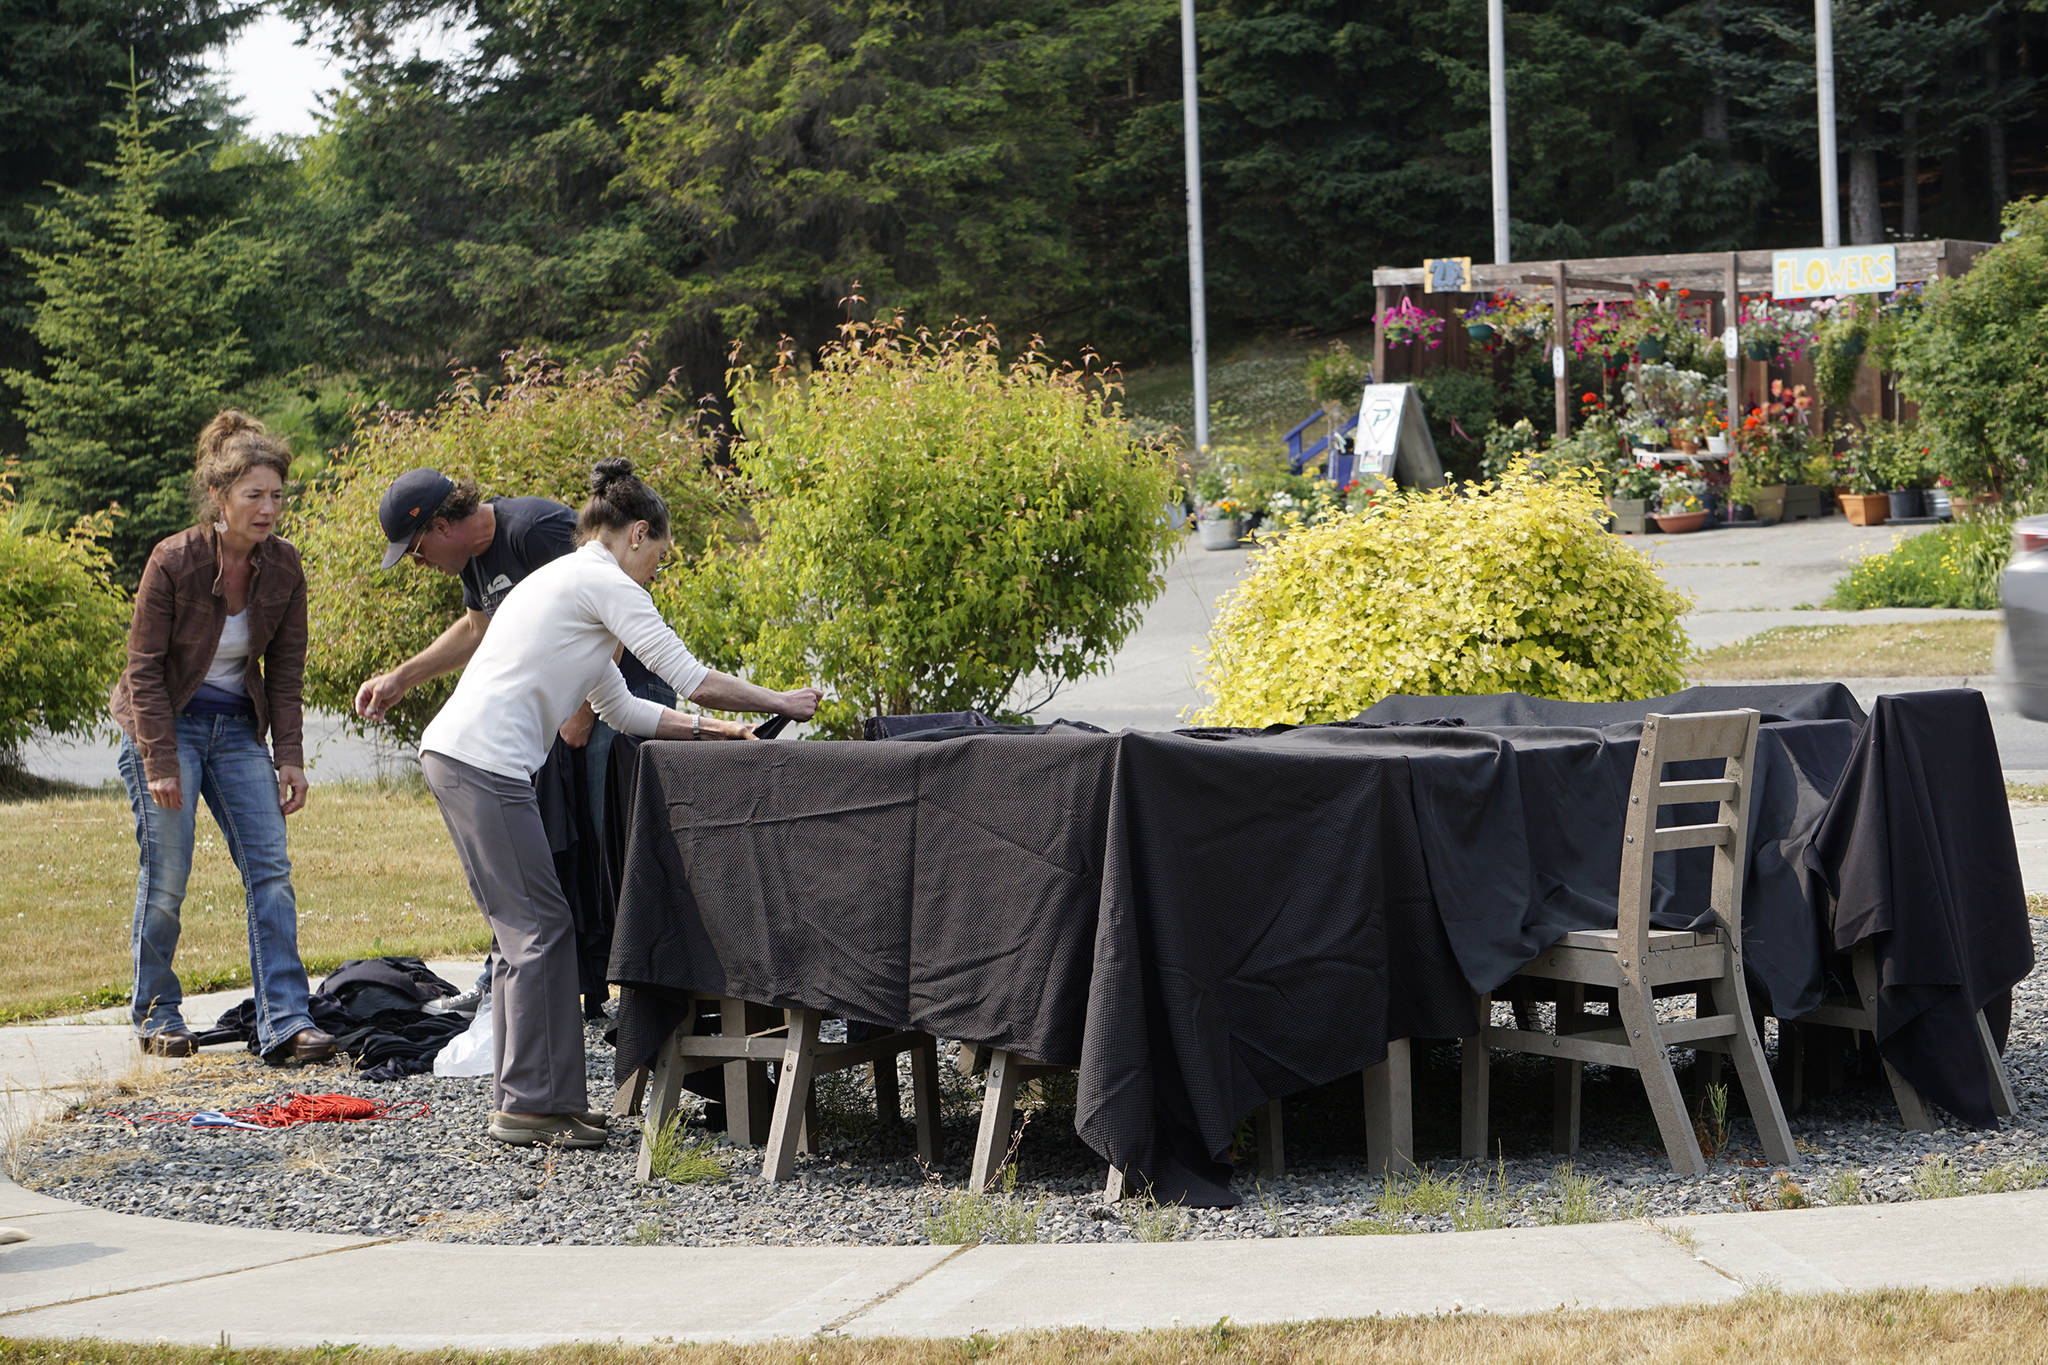 From left to right, artists Asia Freeman, Michael Walsh and Rika Mouw on July 9, 2019, drape a Sean Derry’s public art sculpture in Homer, Alaska, as part of a statewide art intervention to protest Gov. Mike Dunleavy’s veto of a $2.8 million state appropriation to the Alaska State Council on the Arts. They also supported a general override of Dunleavy’s vetoes that will affect funding for the University of Alaska, public radio and other programs. Derry’s sculpture was commissioned as a 1% for art project associated with the remodeling of Pioneer Hall at the Kachemak Bay Campus, Kenai Peninsula College, University of Alaska. The protest was not sanctioned by the college. (Photo by Michael Armstrong/Homer News)